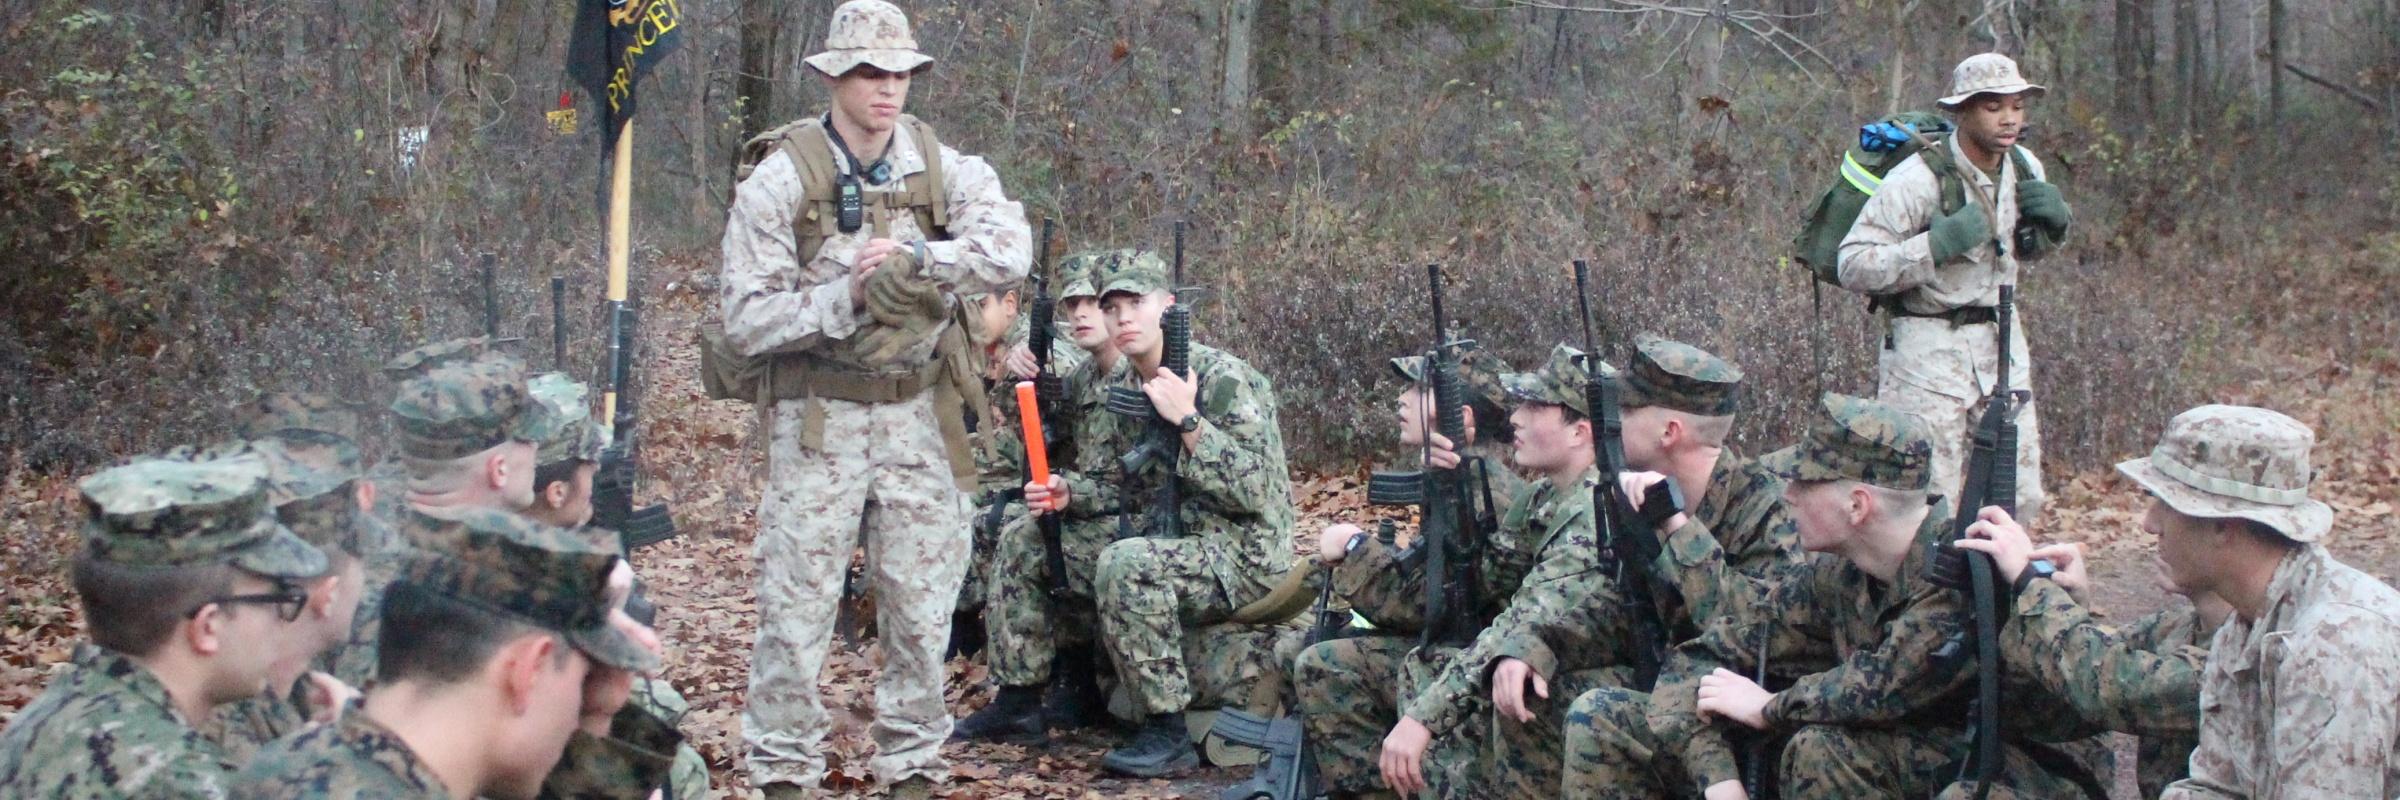 A group of midshipmen in the woods with rifles are briefed by Captain Paragone on a Marine Field Exercise.